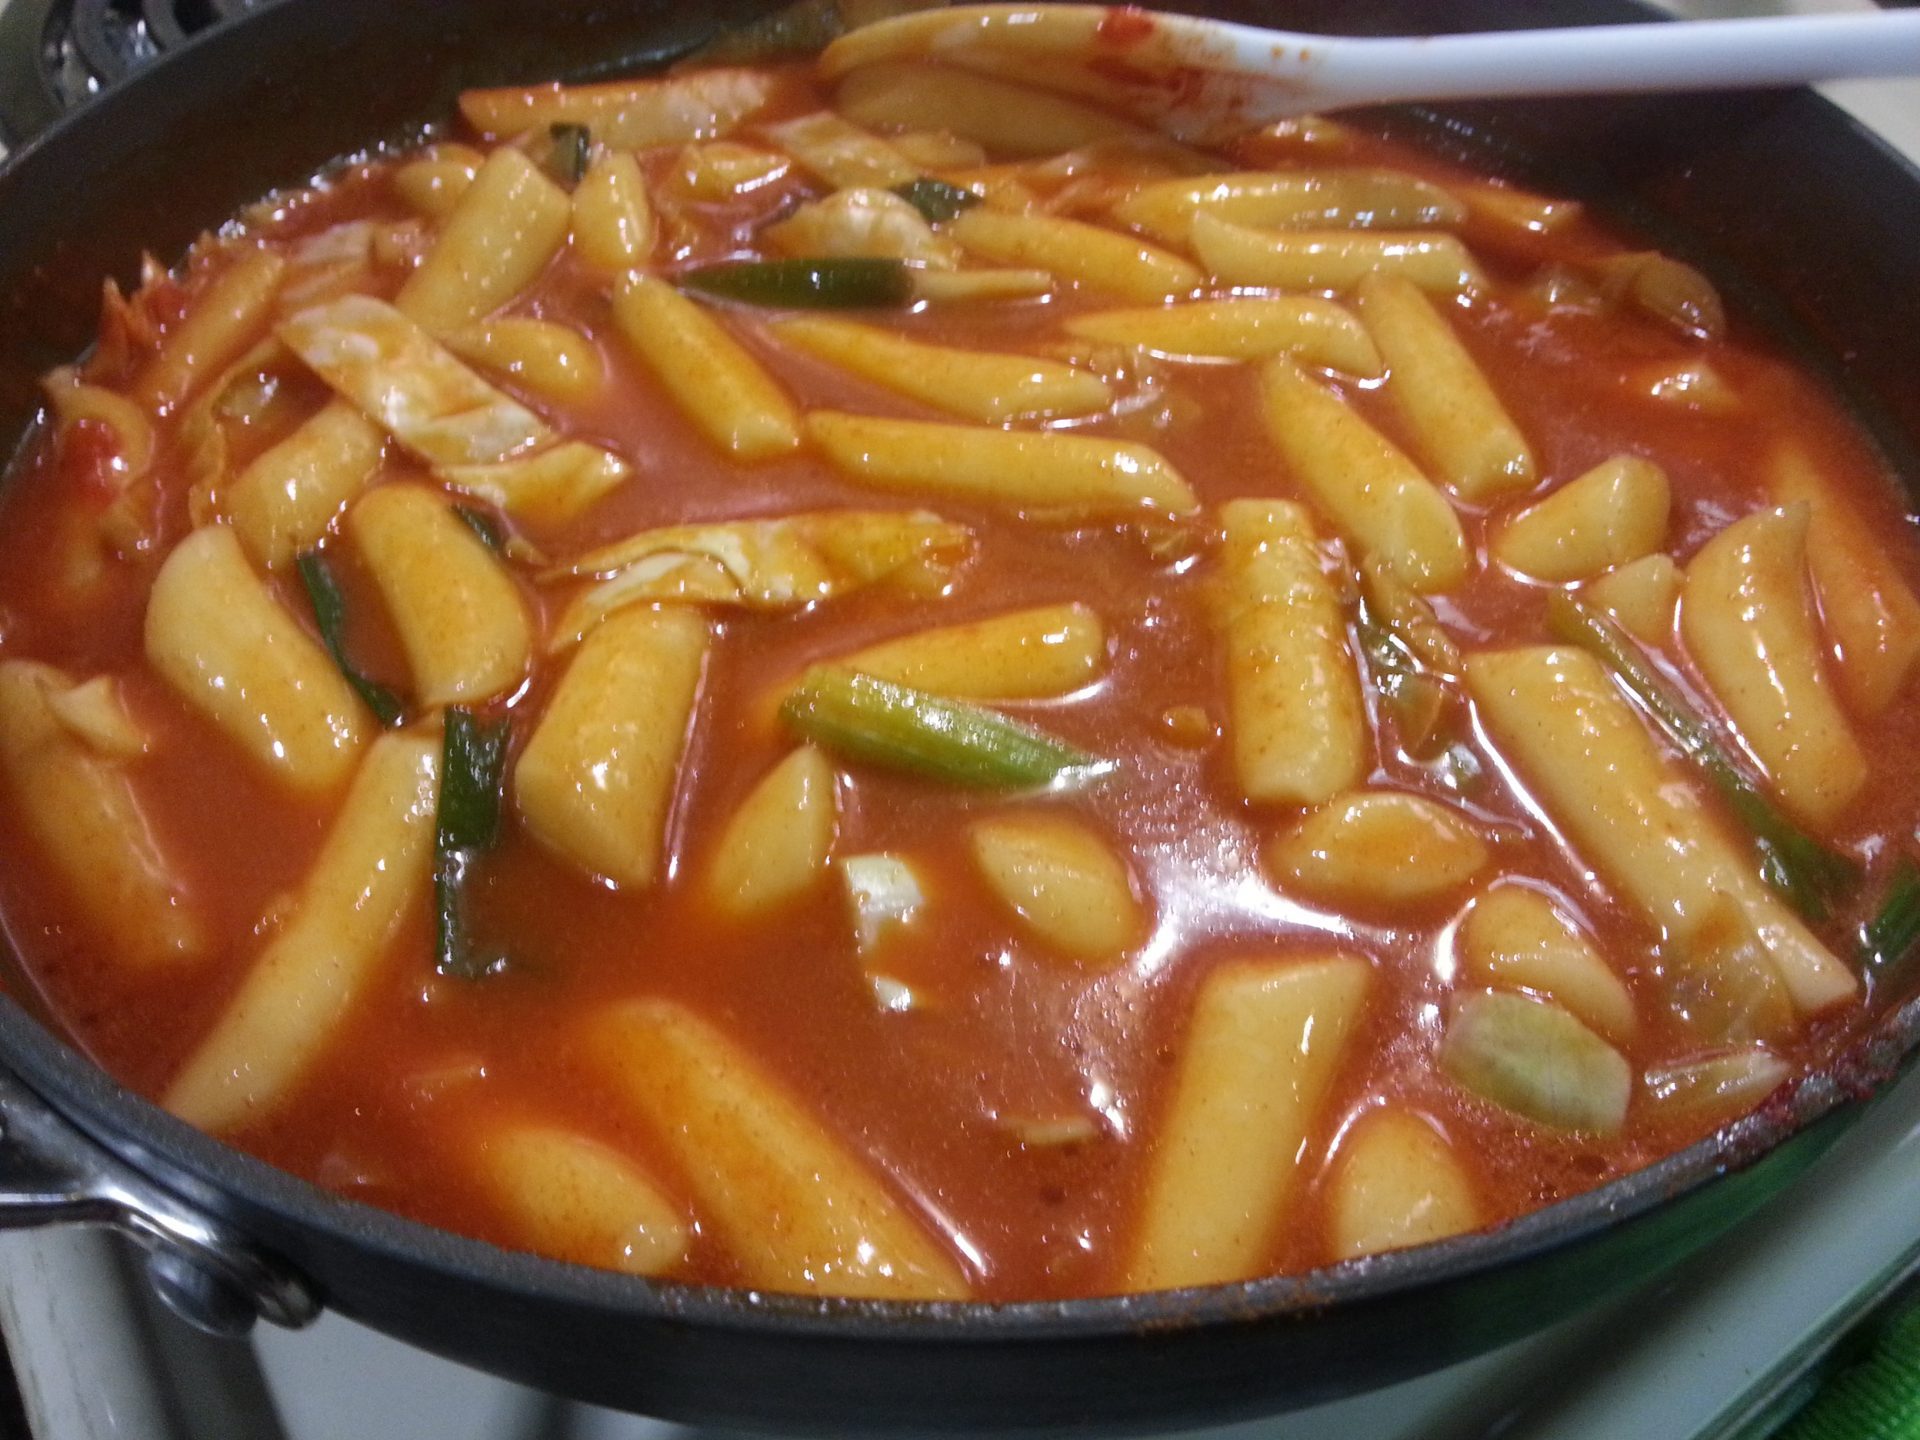 A guide to the must-try dishes in Korea for first-time visitors.